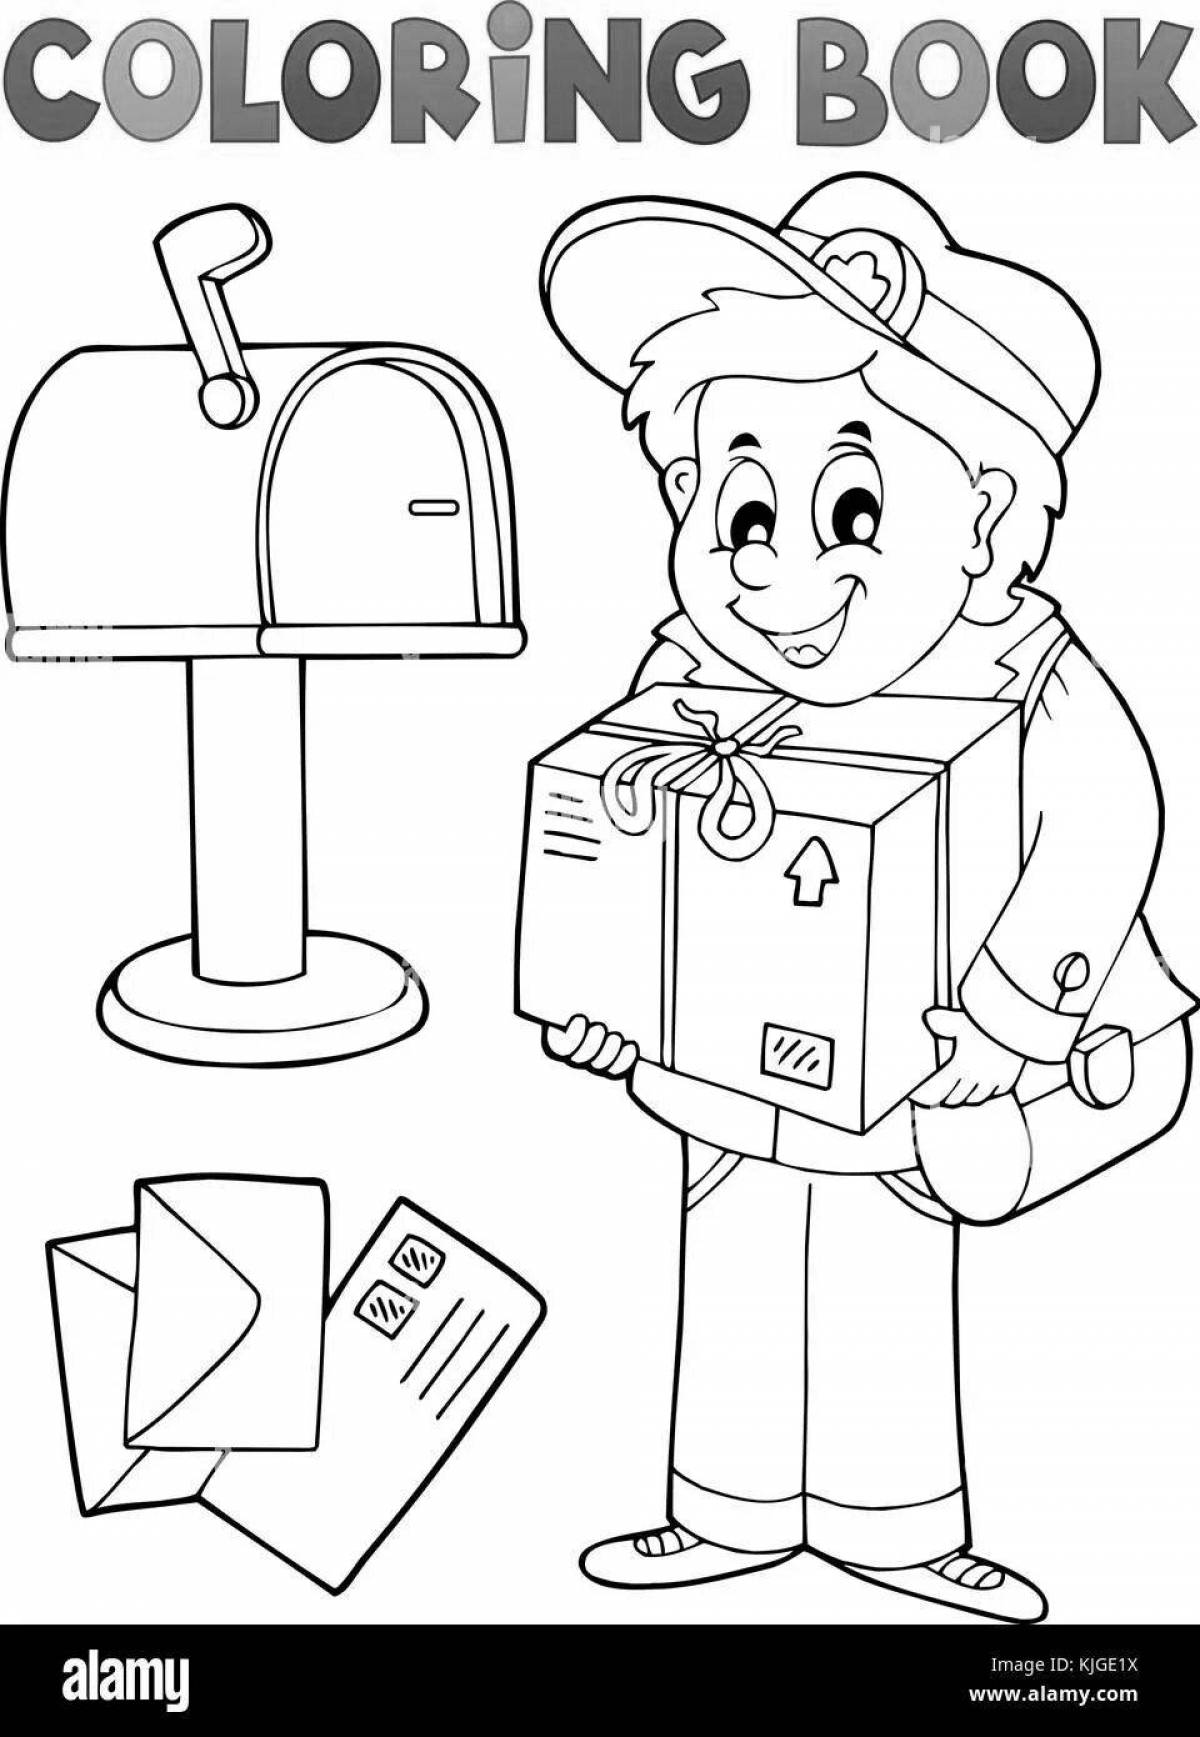 Adorable mail coloring book for kids